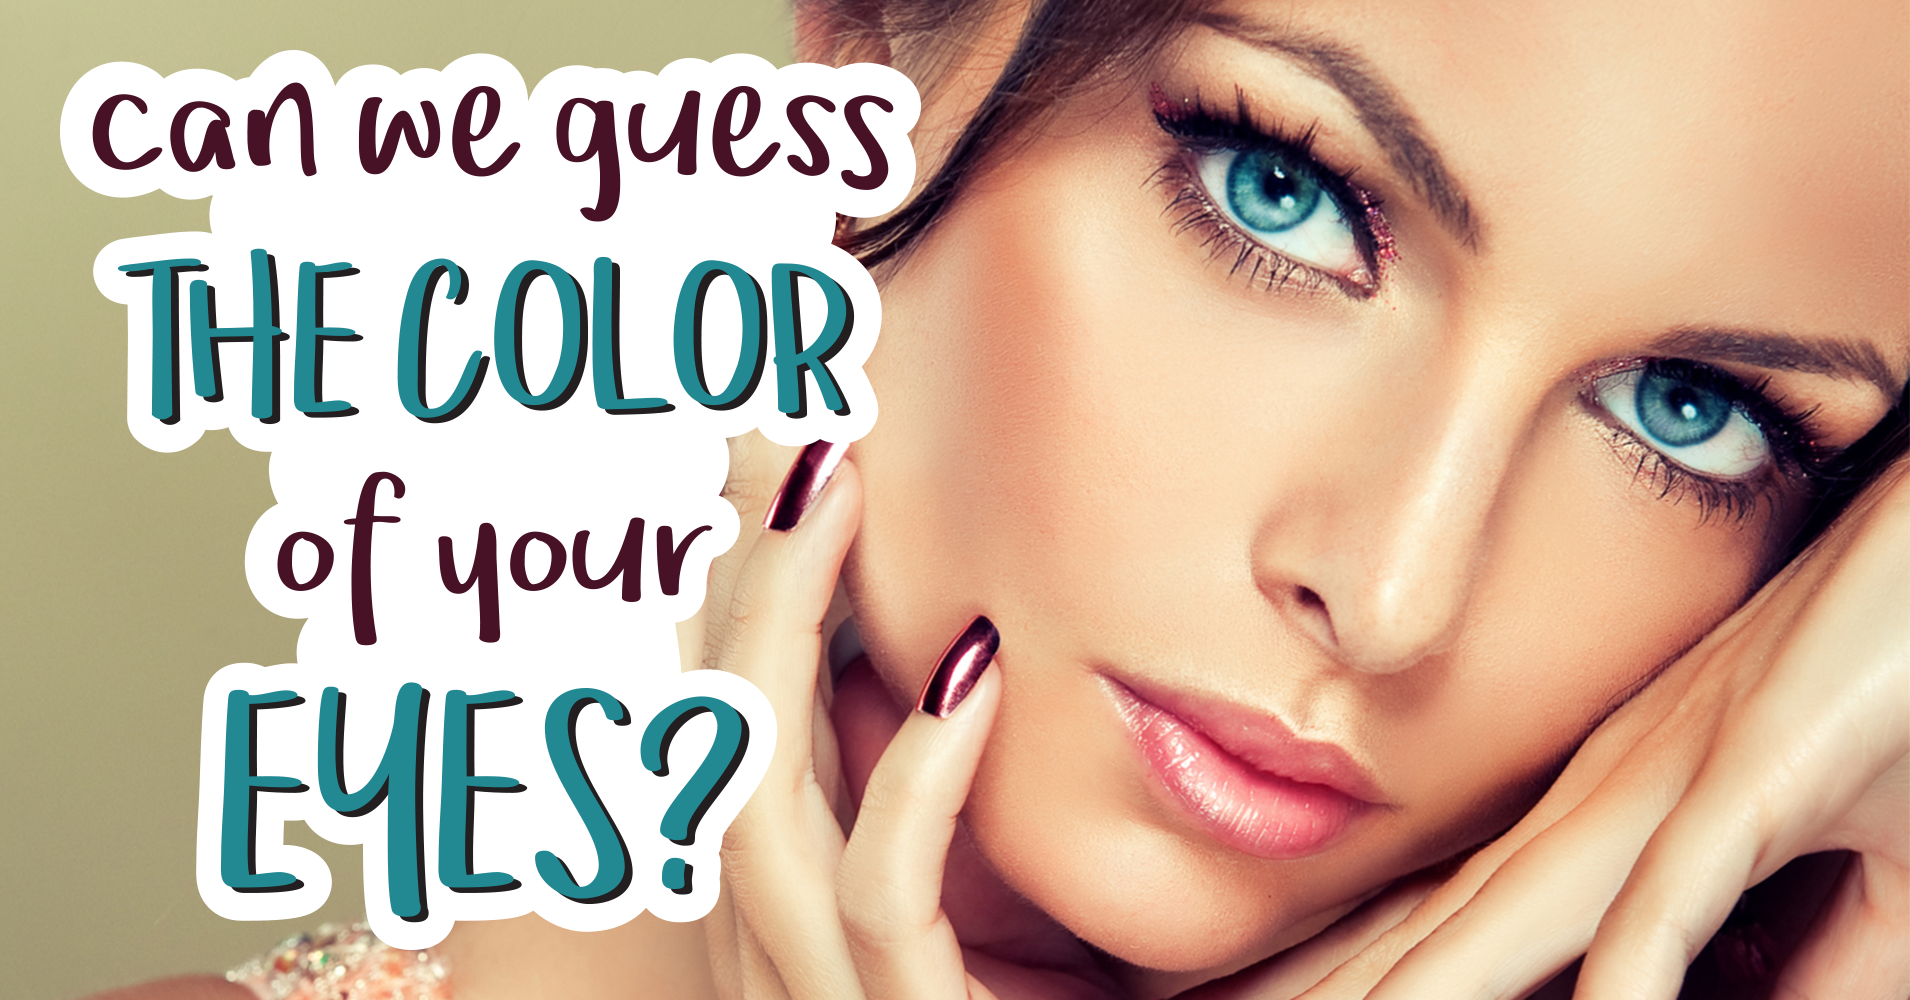 Can We Guess The Color Eyes? - Quiz - Quizony.com